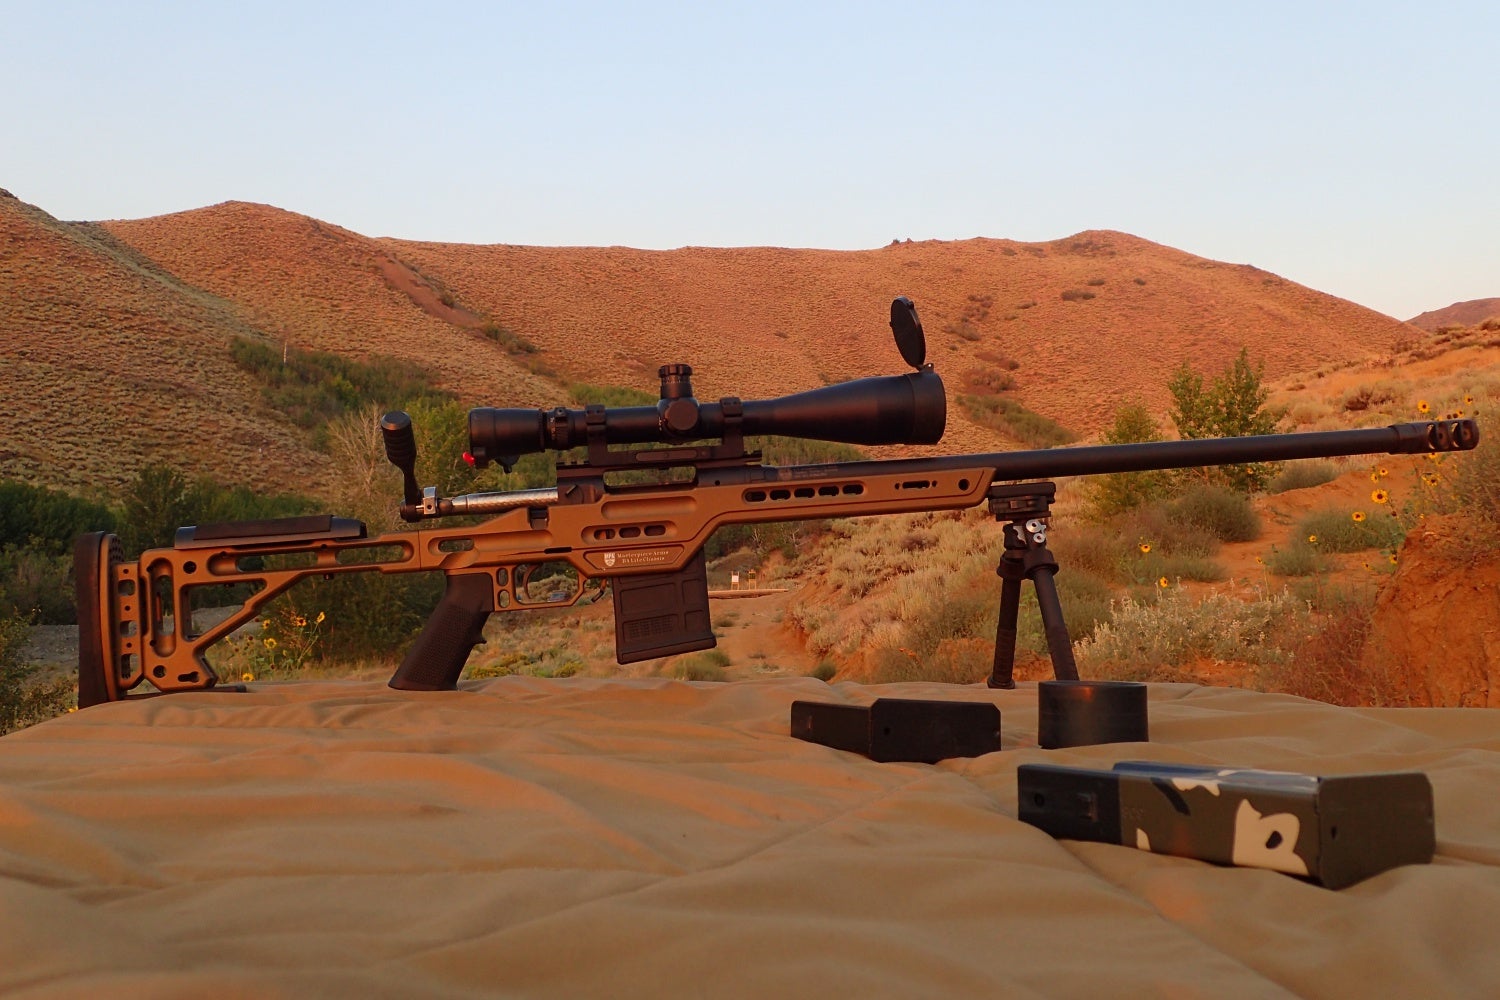 I would describe hitting targets at 1000 yards with the MPA BA Lite PCR Com...